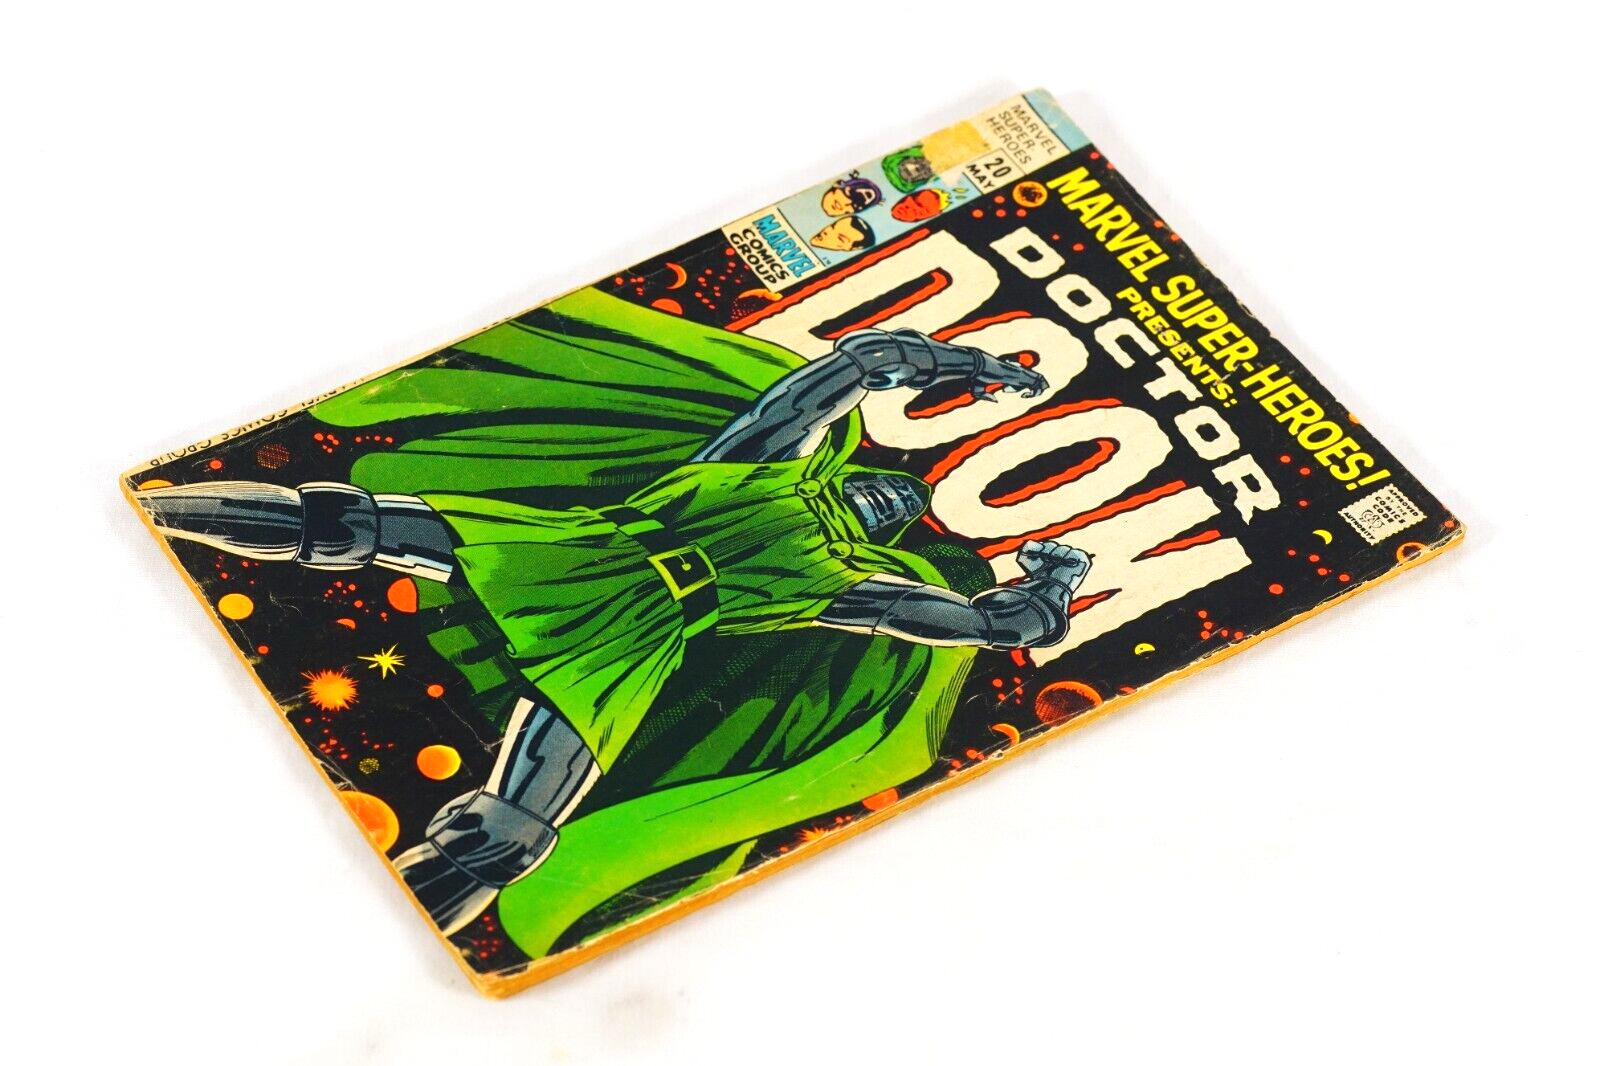 Marvel Super Hereos Presents DOCTOR DOOM 1st Appearance May #20 Comic Book